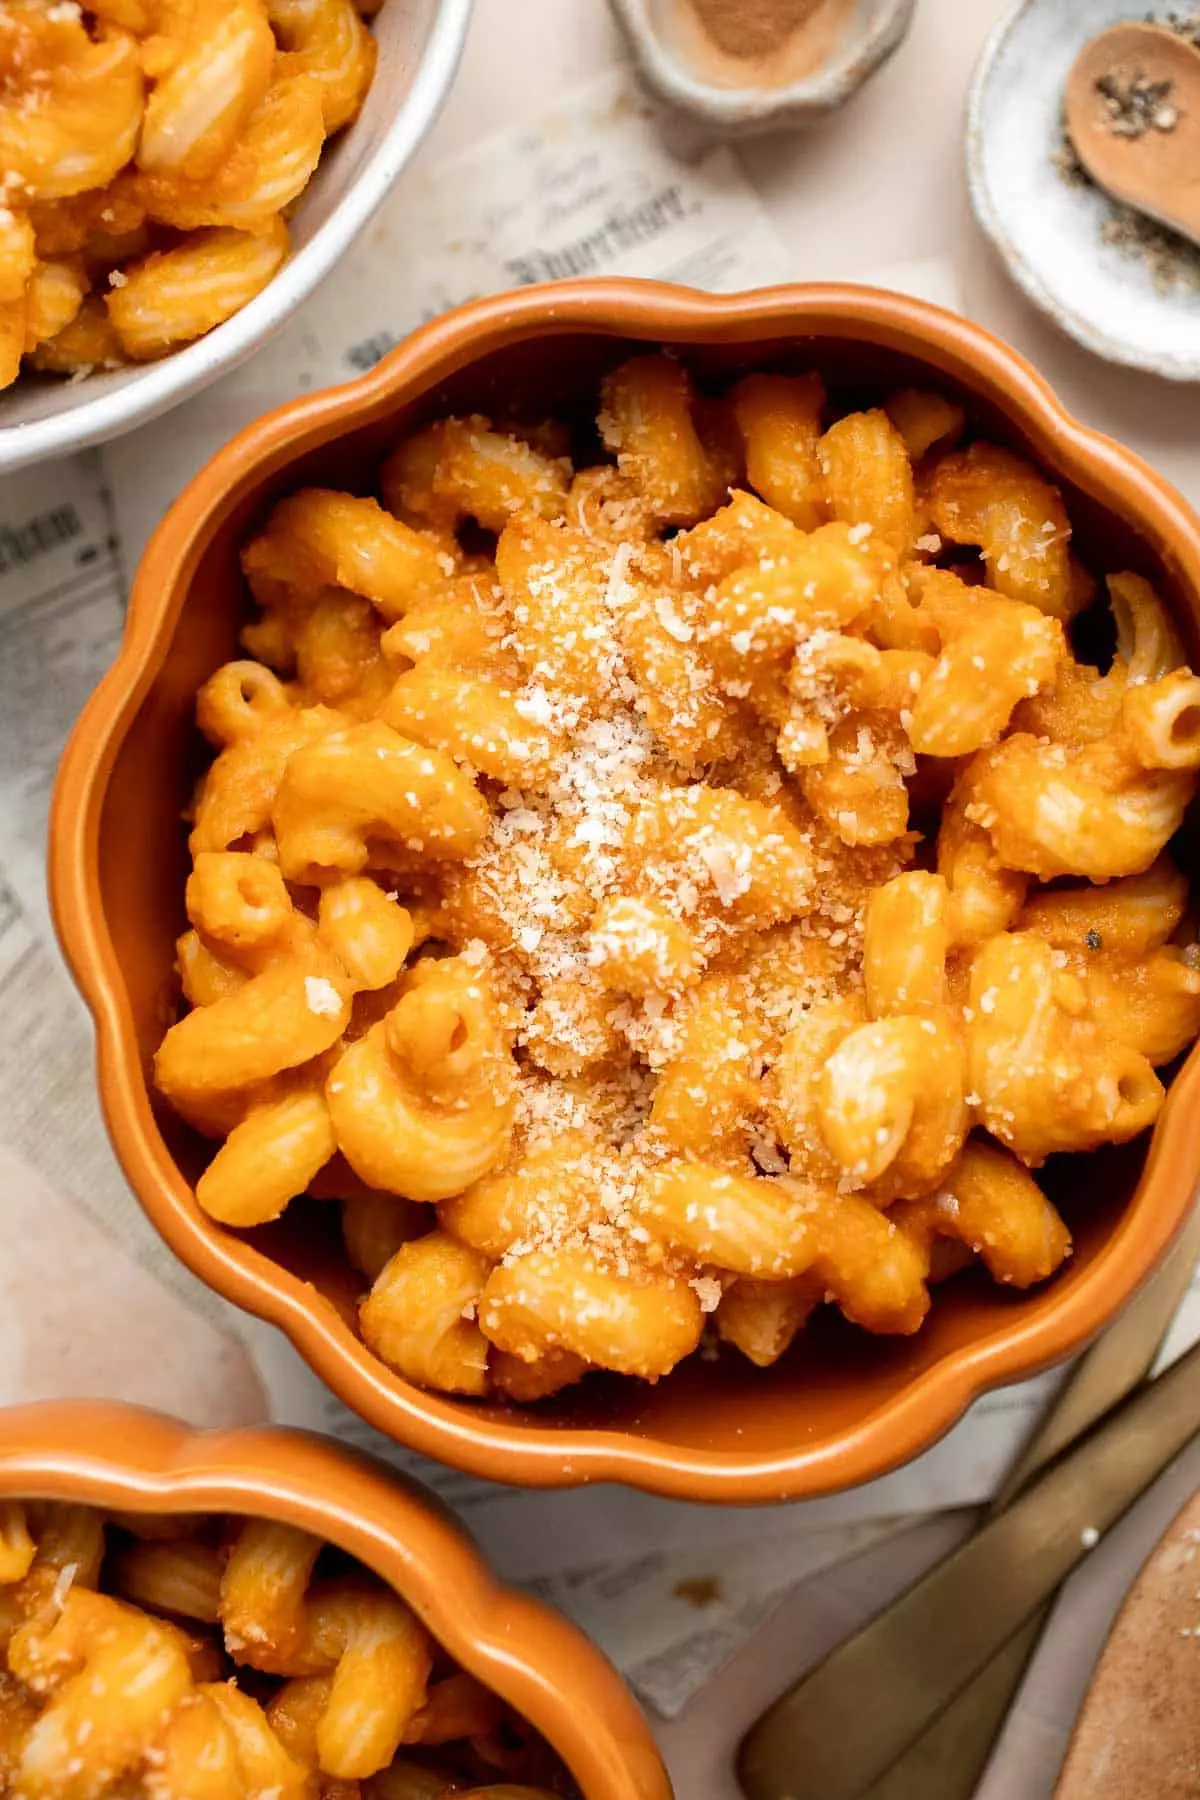 Pumpkin Pasta is one of the quickest and easiest pasta dishes you can make this fall! It